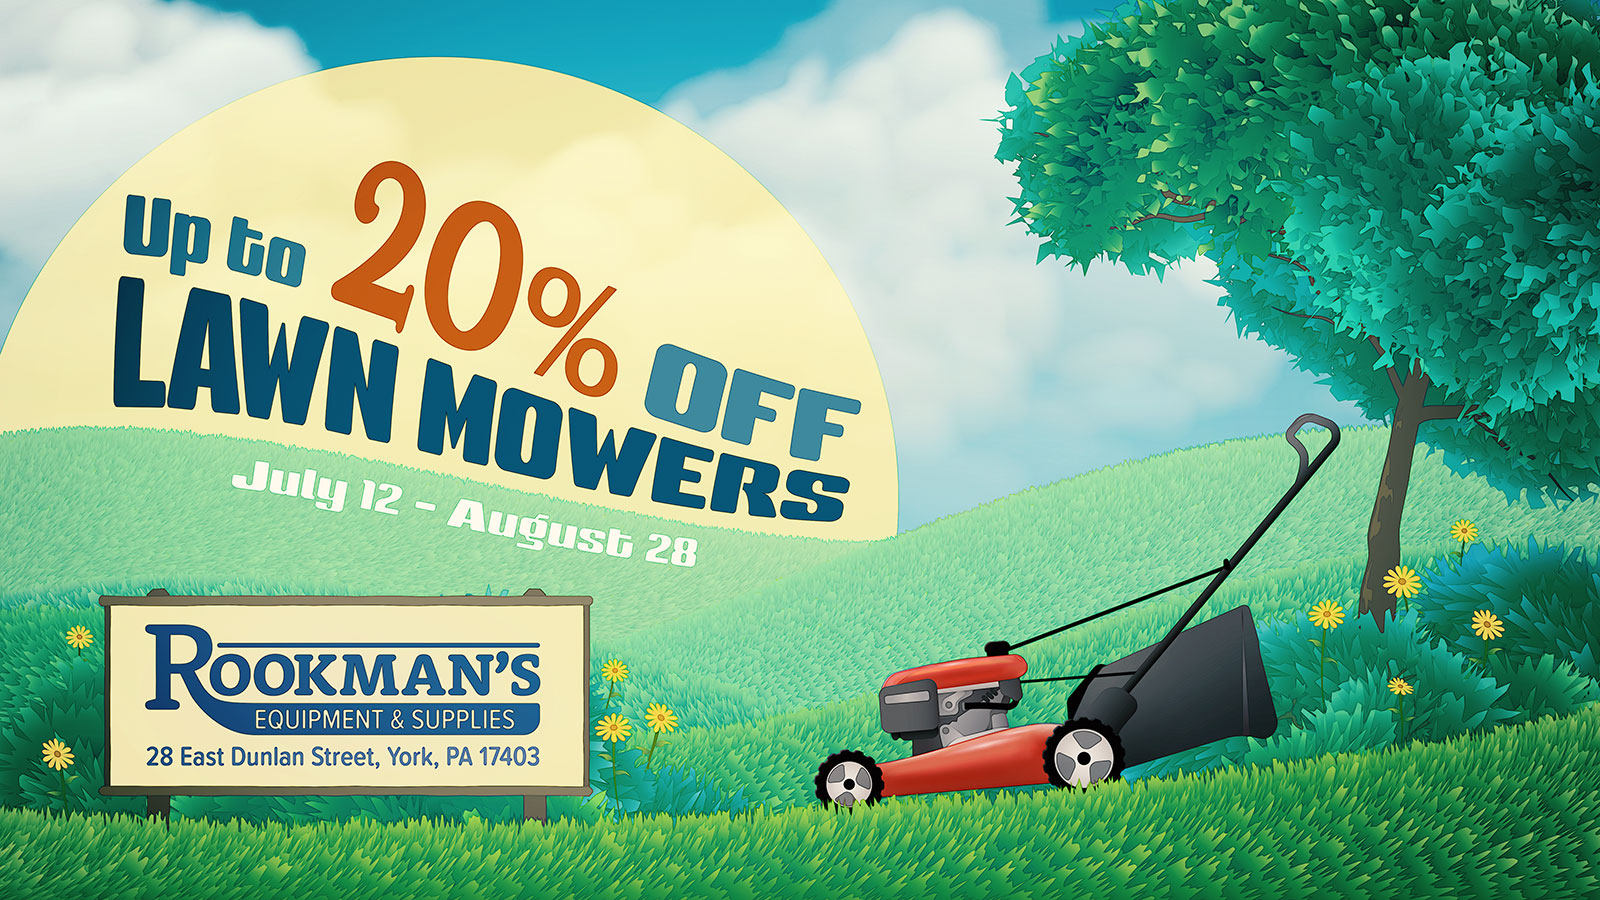 Colorful lawn mower ad designed in Illustrator. It features a red lawn mower, a sign for a fictitious company, green grassy hills, and the text 'Up to 20% off Lawn Mowers'.